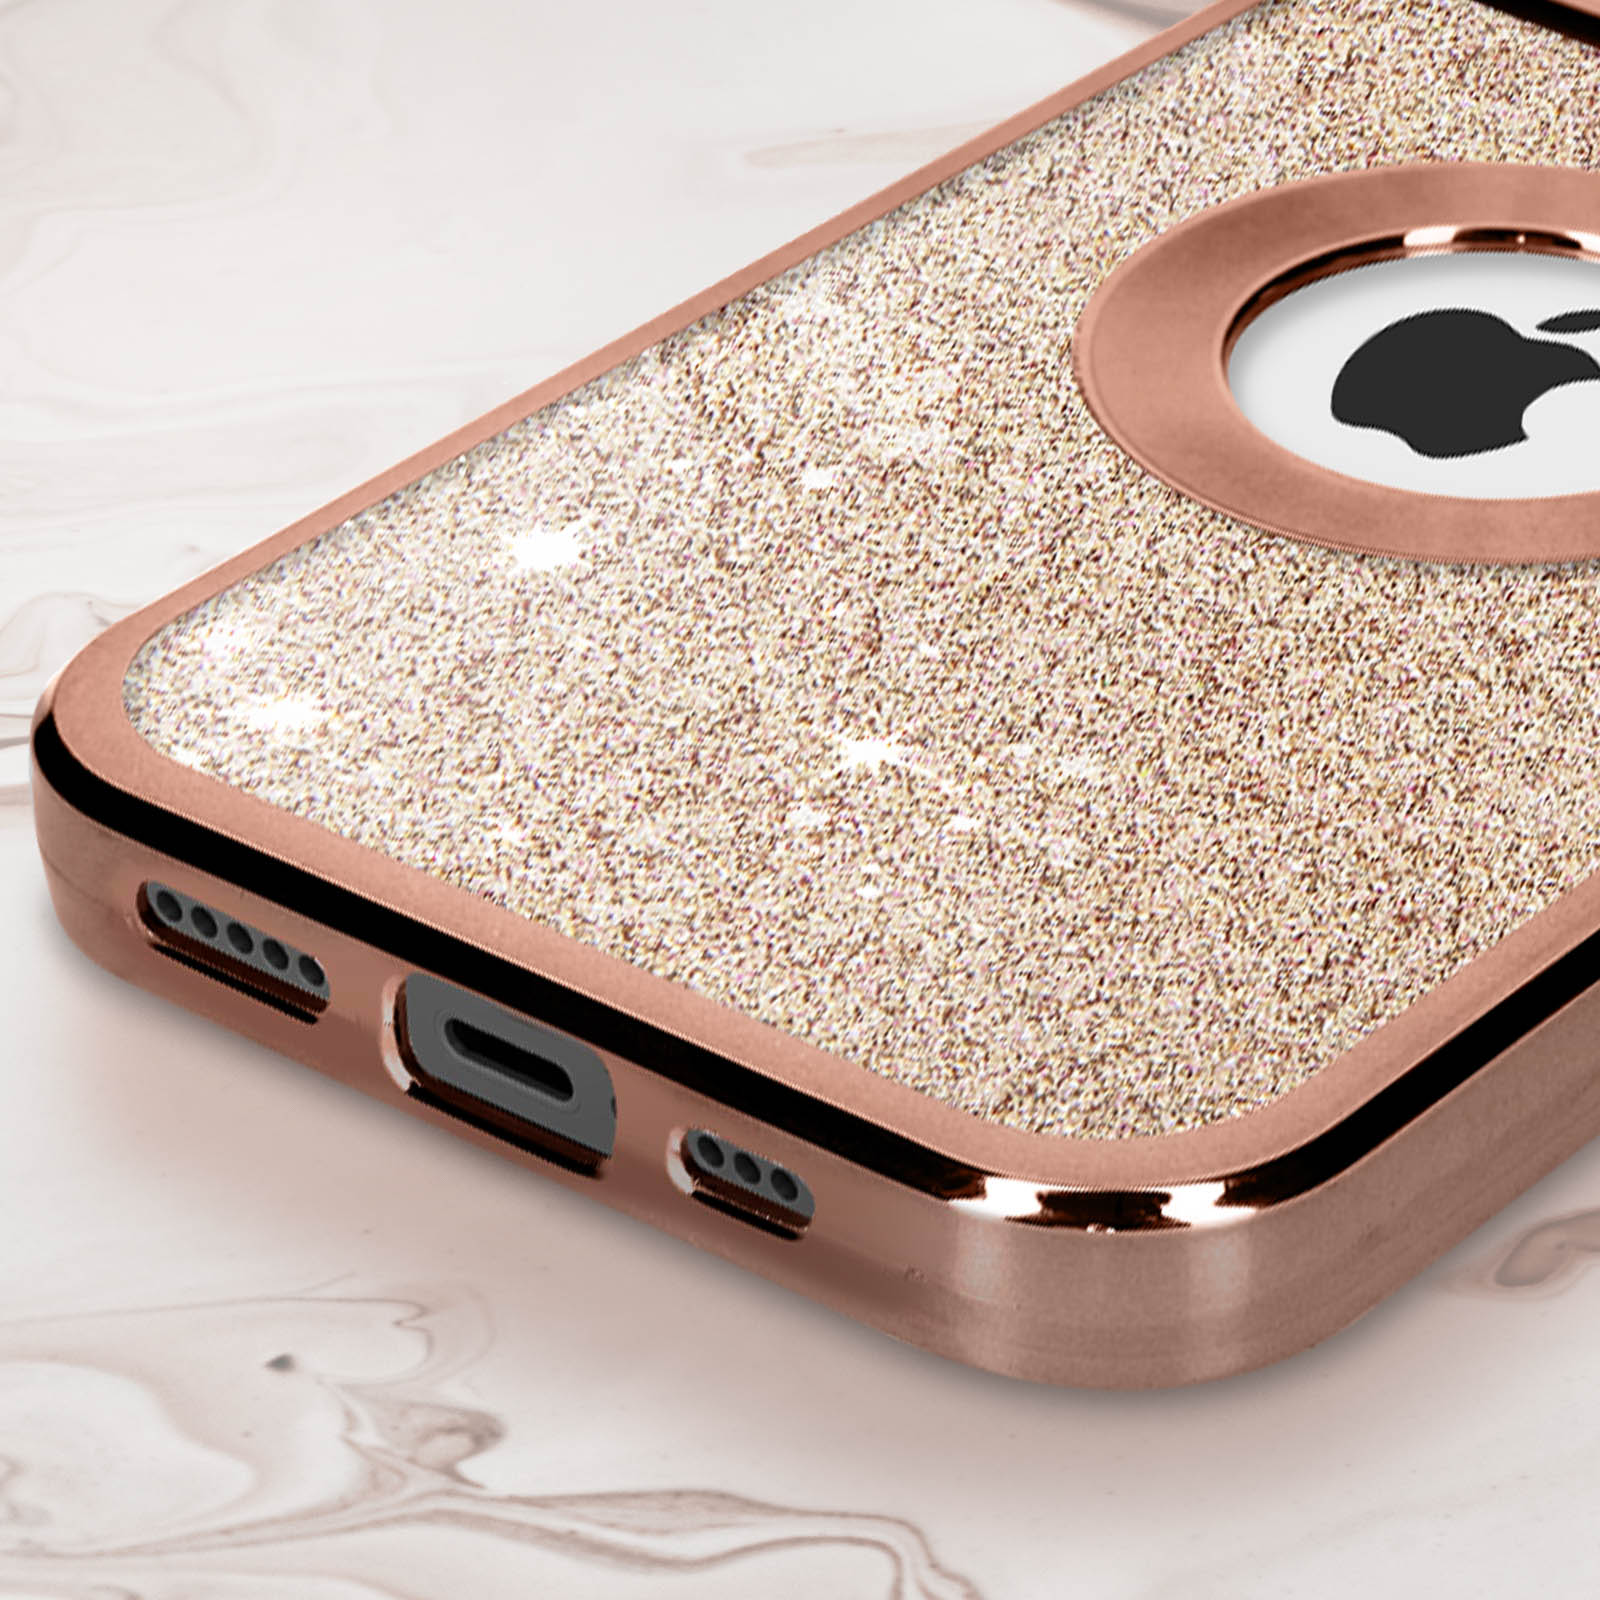 AVIZAR Protecam 12 Pro Apple, Rosegold iPhone Series, Spark Max, Backcover